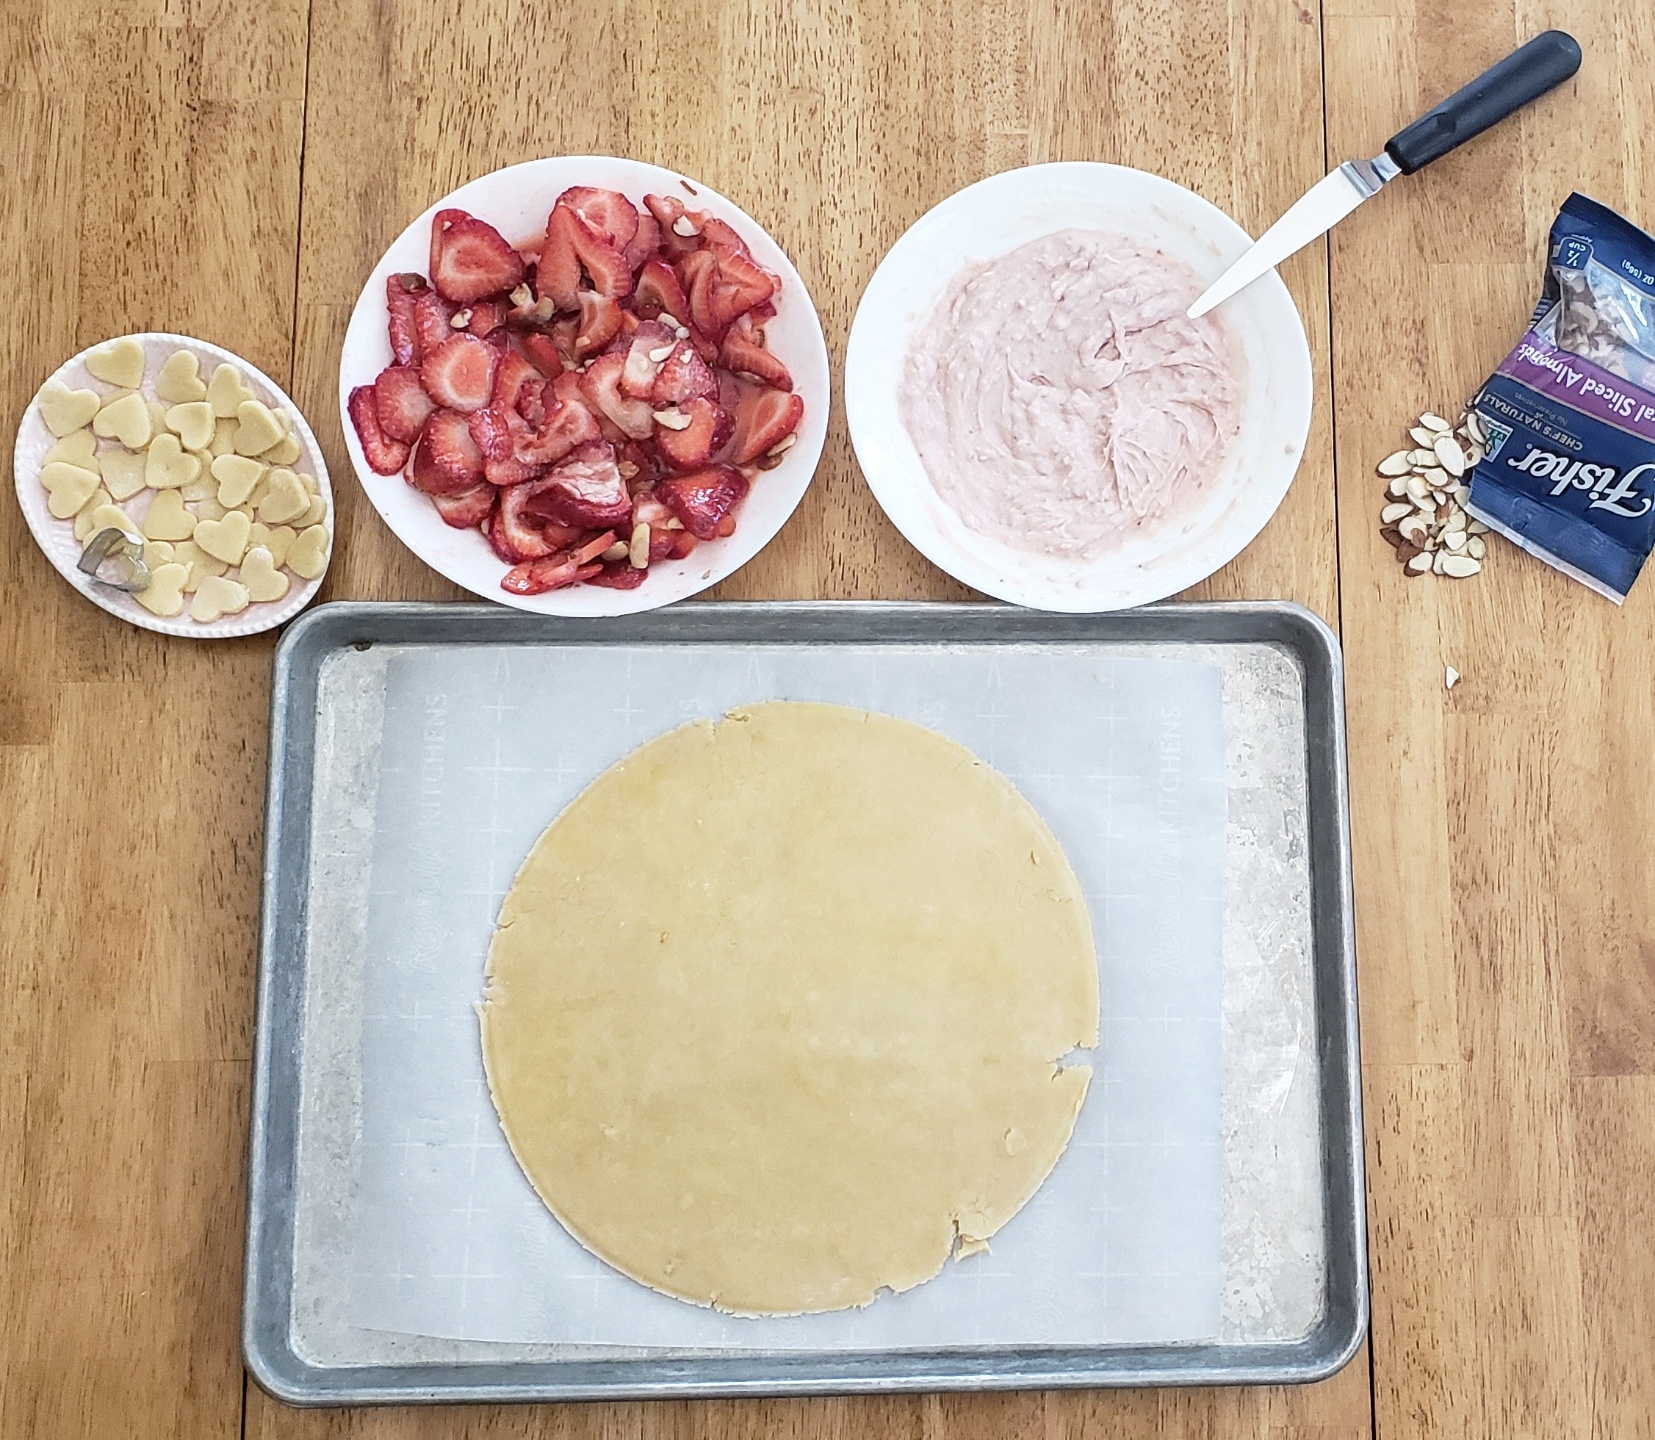 Strawberry crust lying on a baking sheet. 3 plates, one with Pie filling, one with strawberries, and one with dough decorations